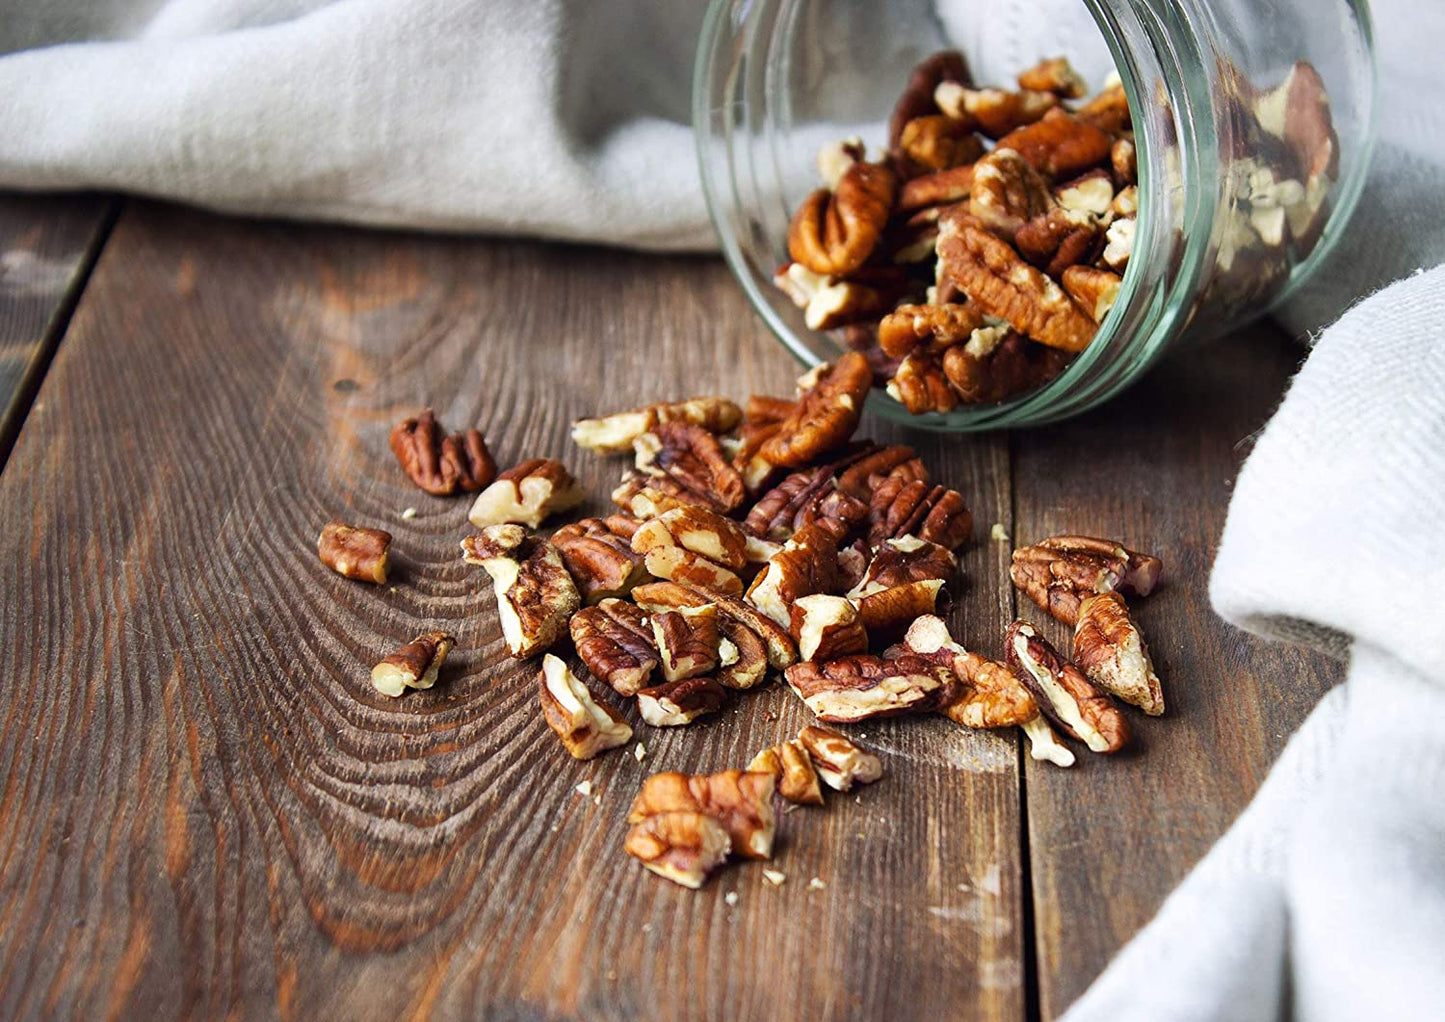 Organic Raw Pecan Pieces - Fresh Nuts, Non-GMO, Kosher, Unsalted, Bulk, Best for Baking, Sirtfood, Product of the USA - by Food to Live